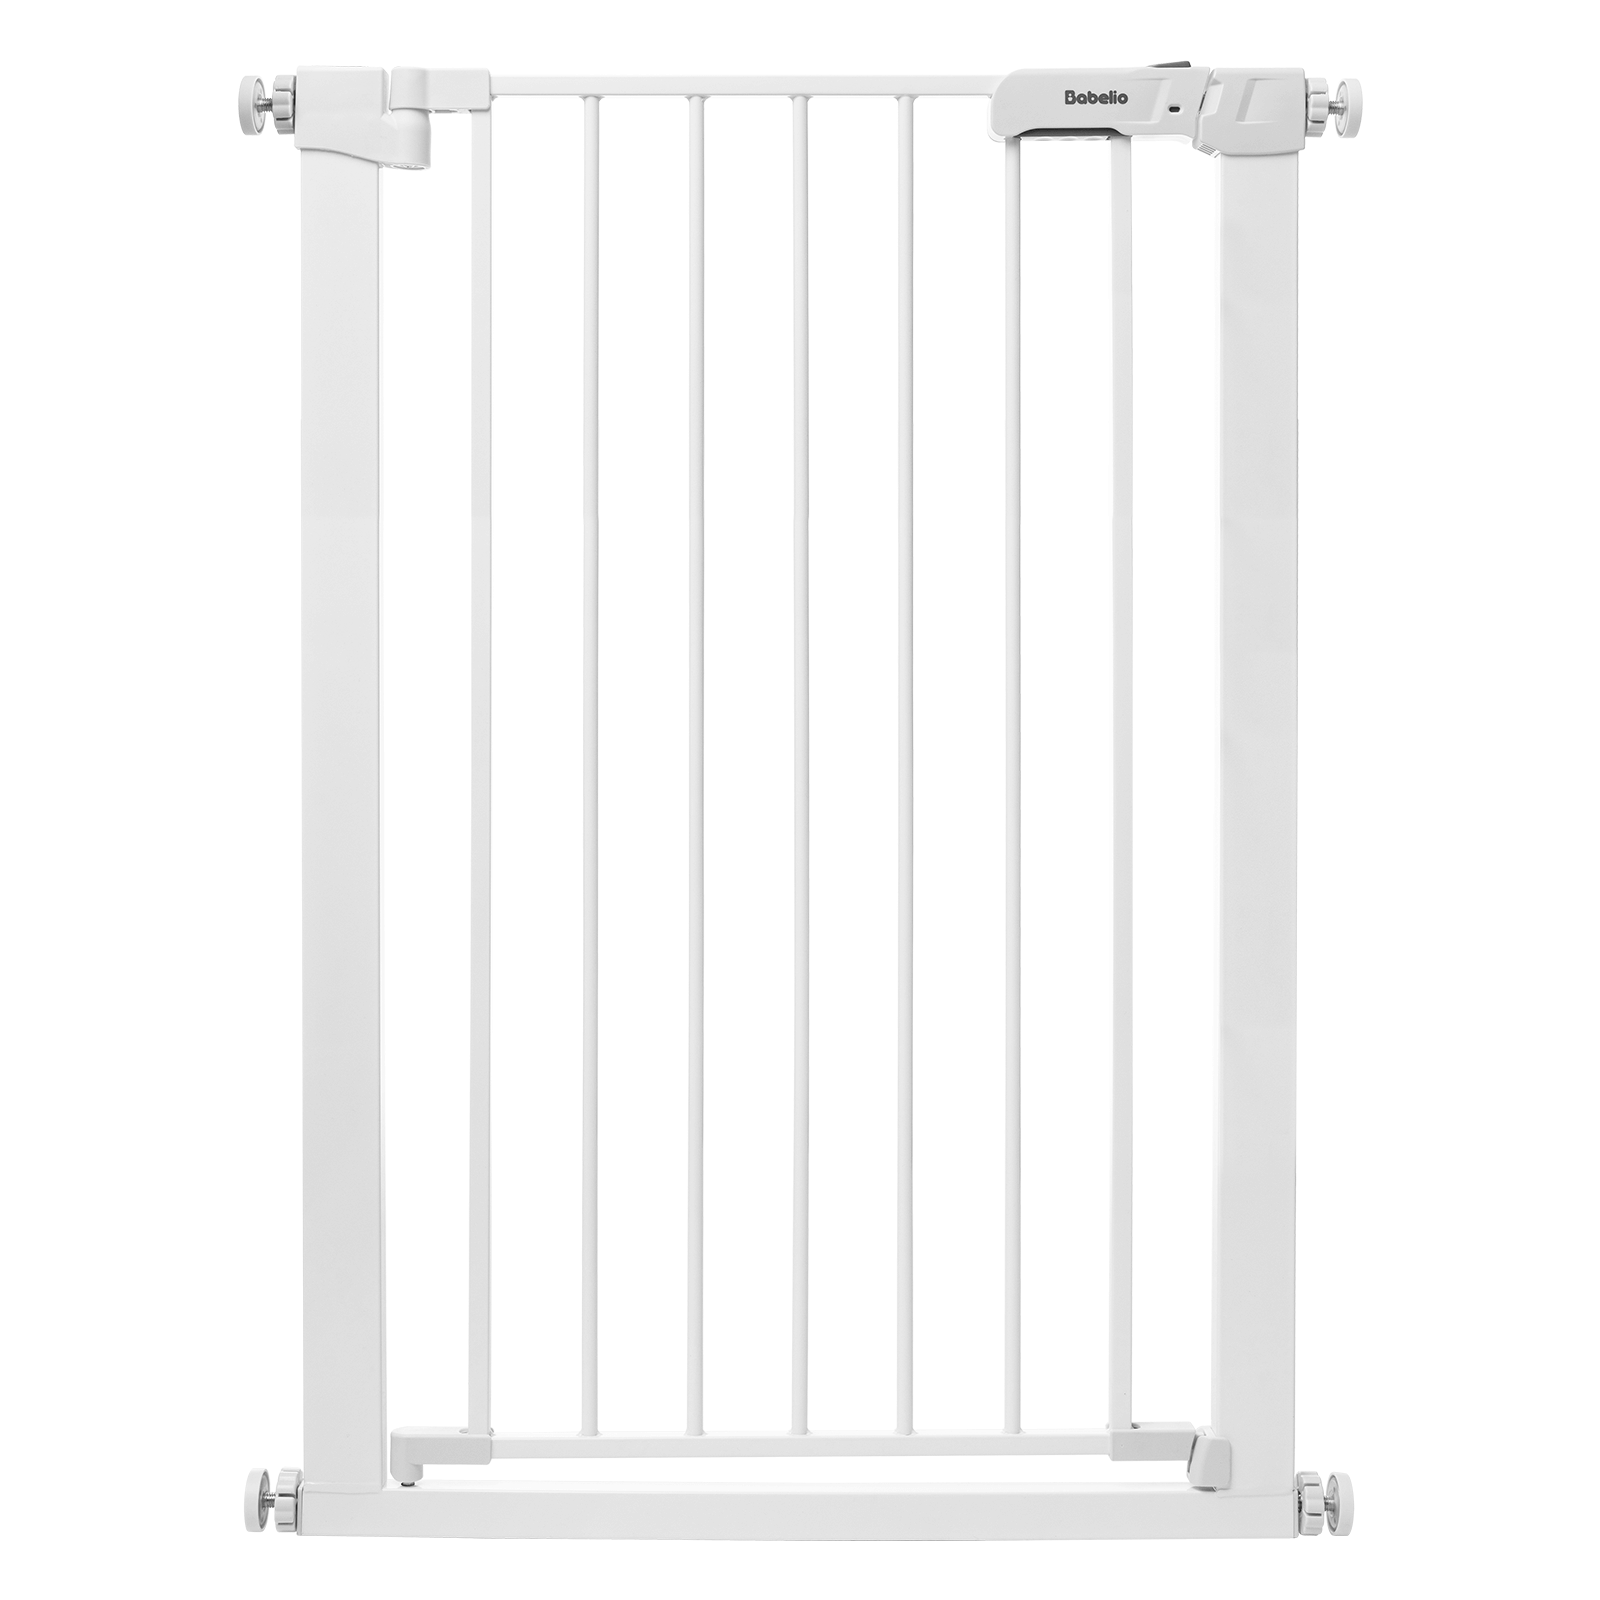 36" Tall Narrow Baby & Pet Gate - Fits 27-30 Inch Openings - Easy Walk Thru - Pressure/Hardware Mounted Safety Gate